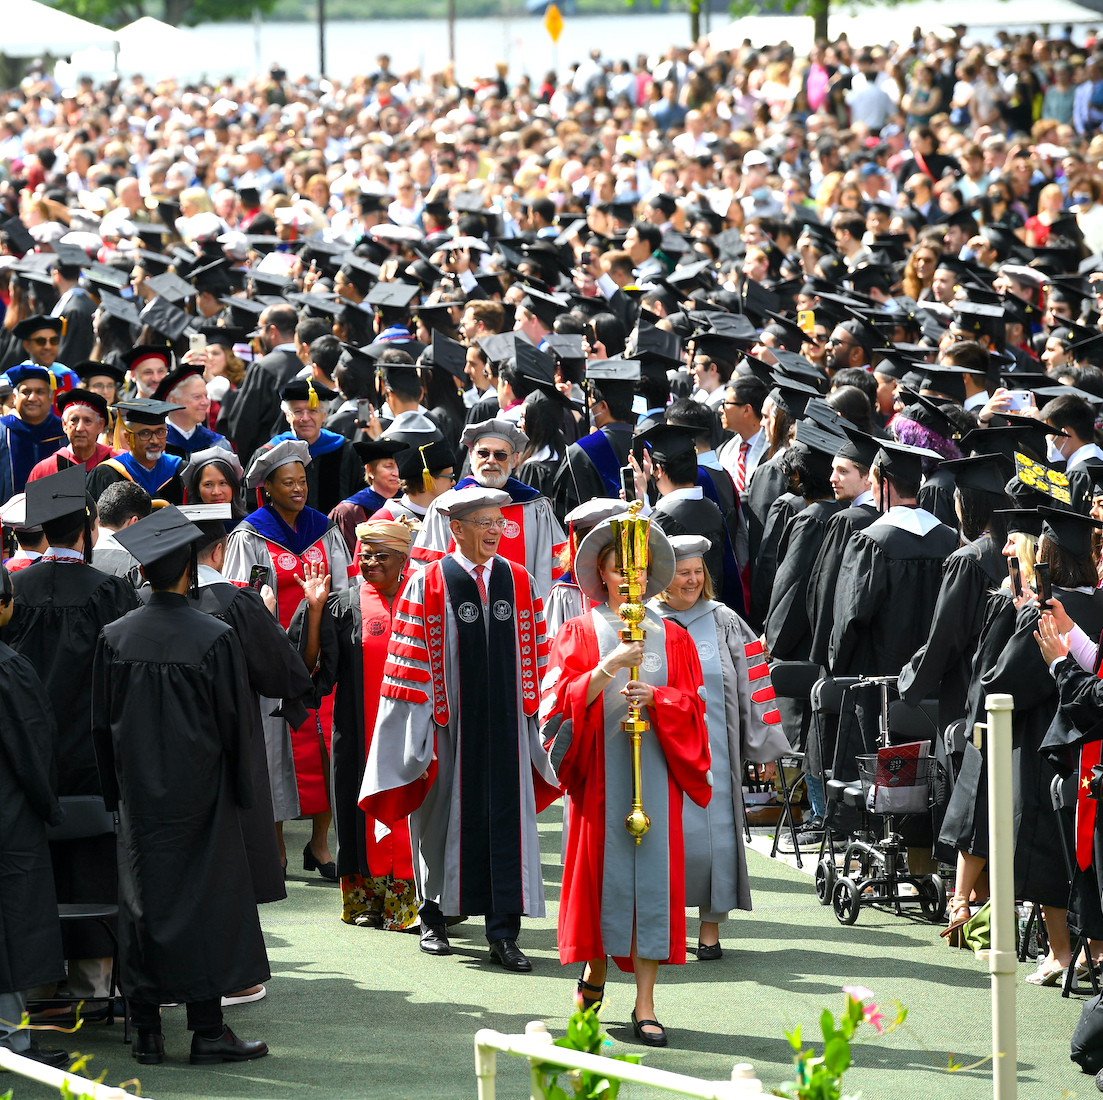 Image shows the academic procession arriving at Killian Court for the 2022 OneMIT Commencement Ceremony